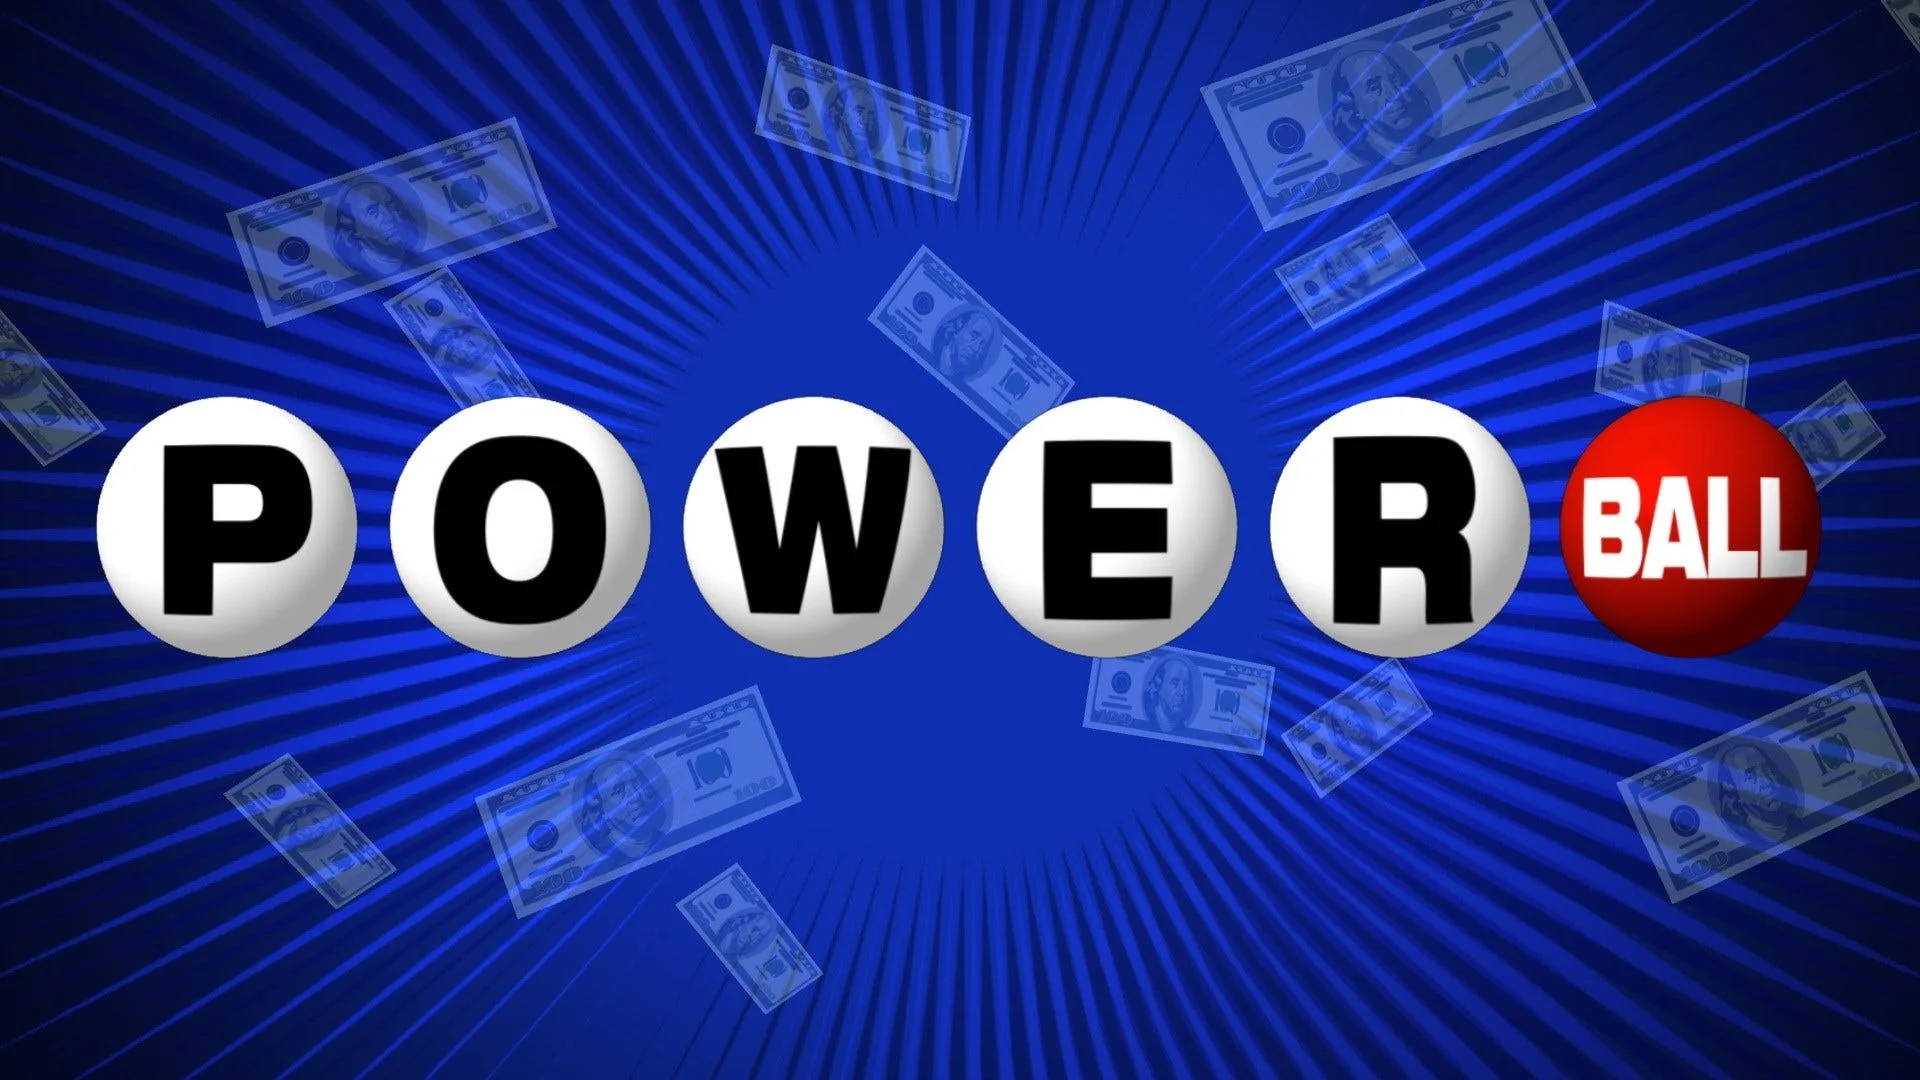 Free Powerball Wallpaper Downloads, [100+] Powerball Wallpapers for FREE |  